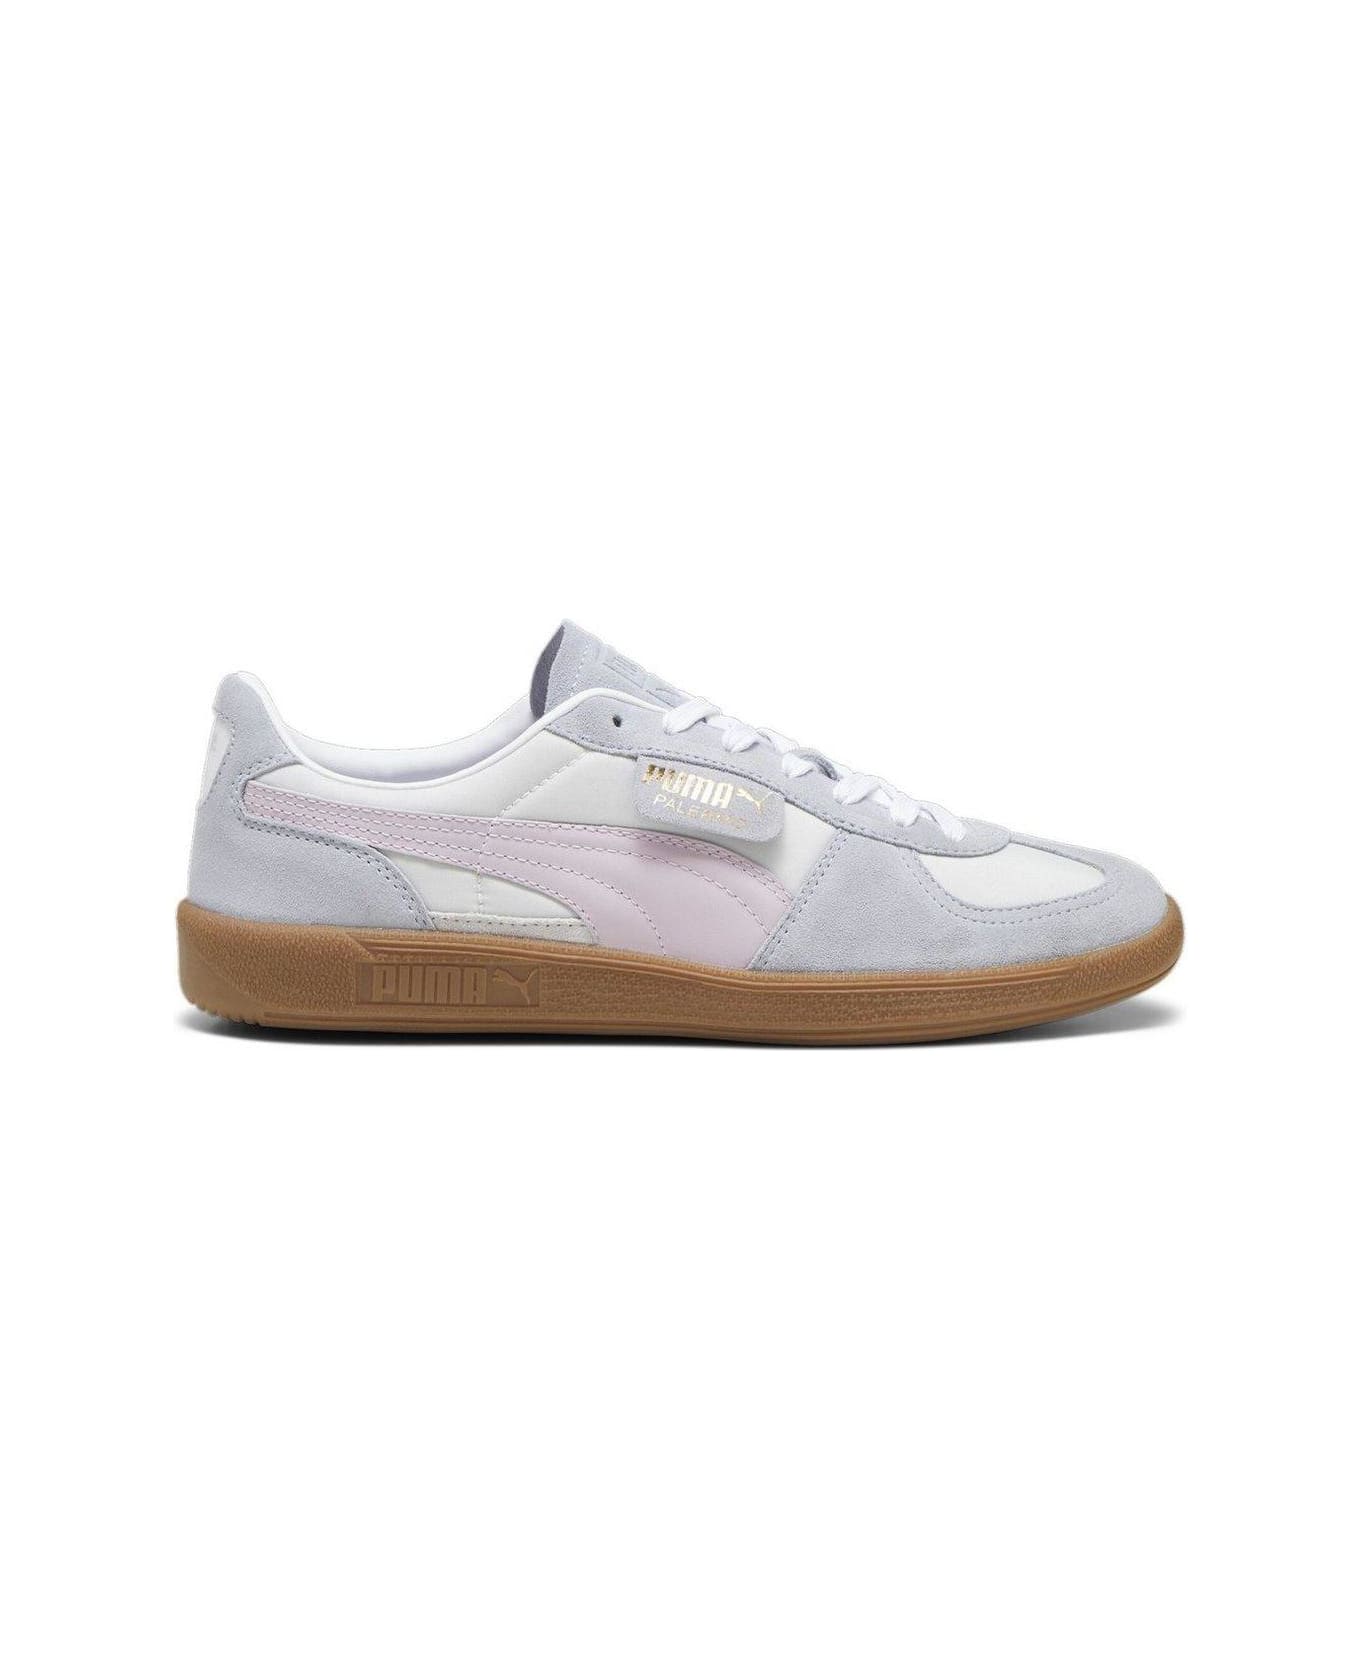 Puma Palermo Og Lace-up Sneakers - Pink スニーカー